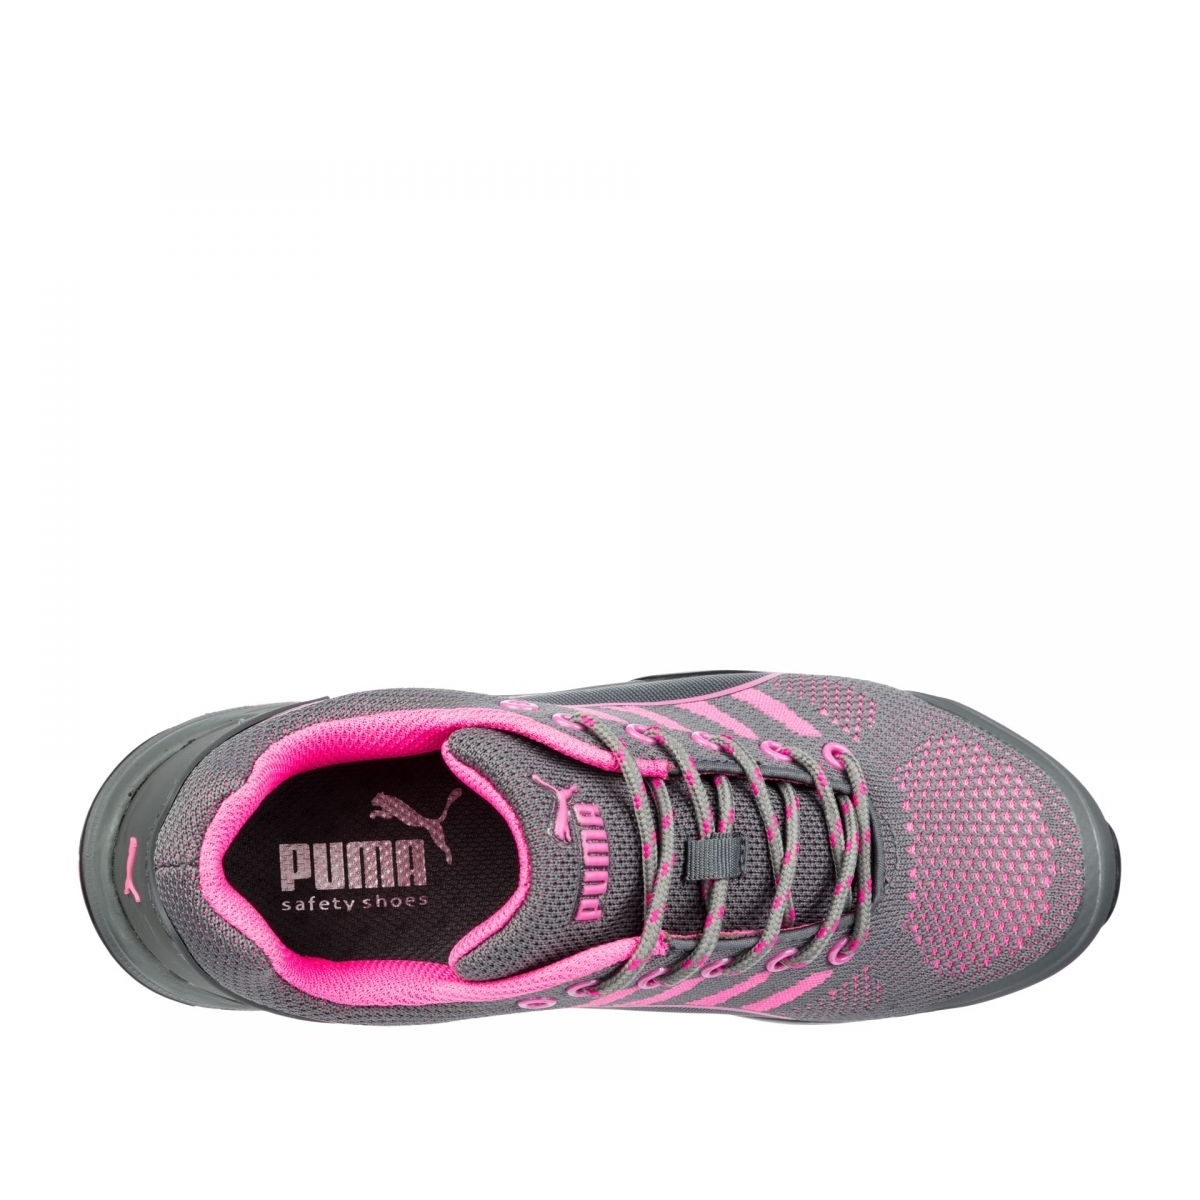 PUMA Safety Women's Celerity Knit Low Steel Toe ESD Work Shoe Pink - 642915 ONE SIZE PINK - PINK, 8